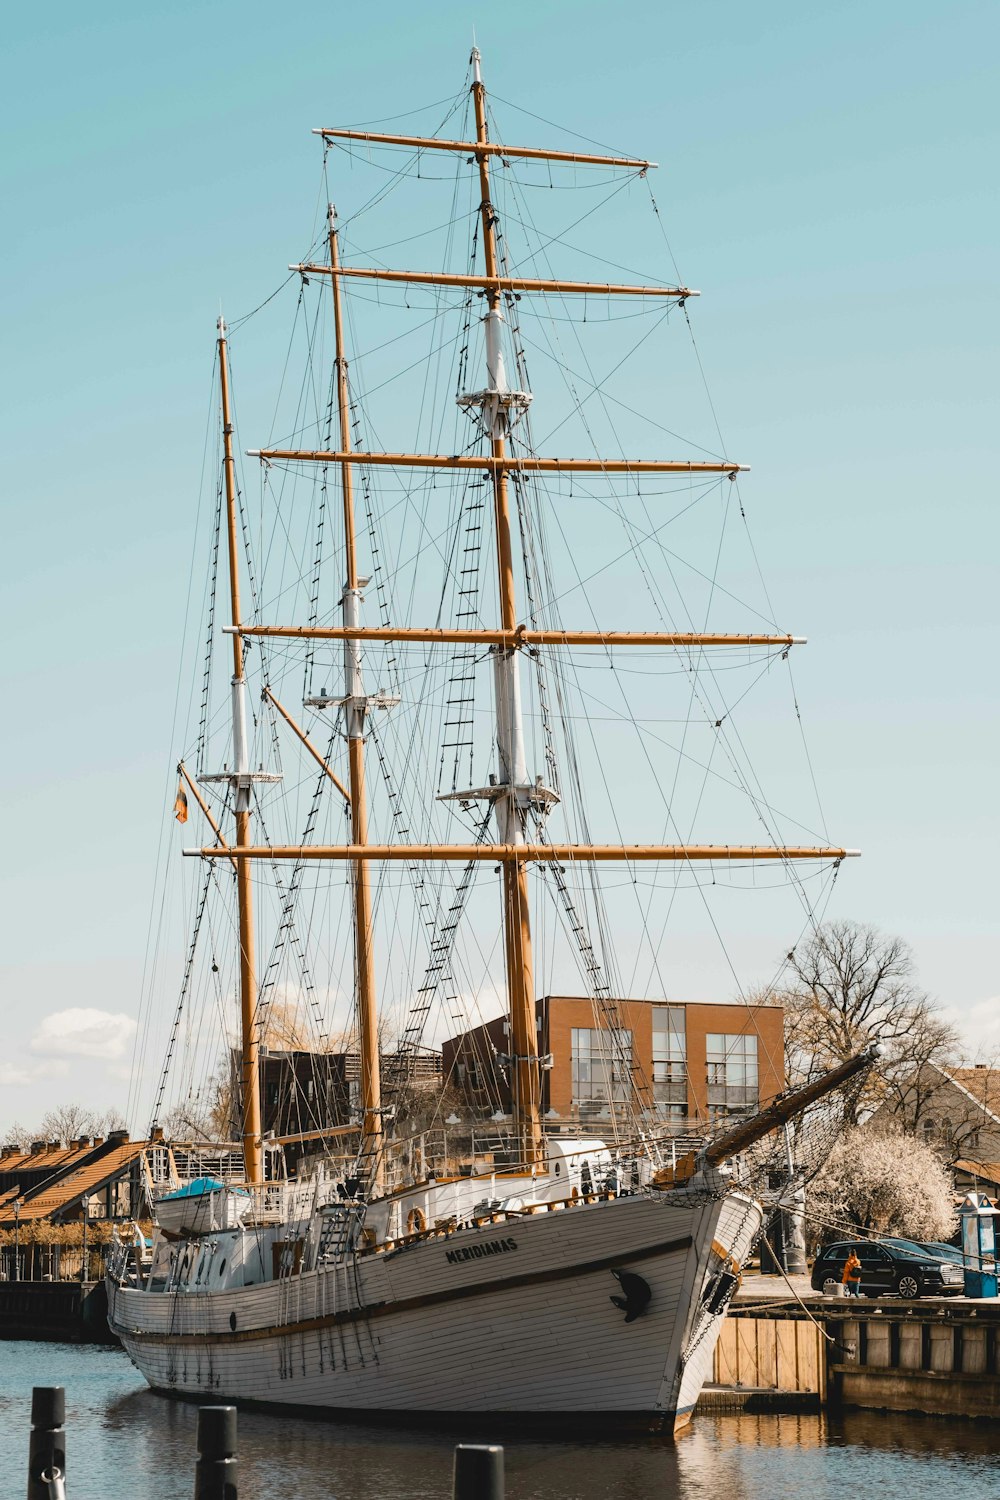 a large sailboat docked with HMS Warrior 1860 in the background